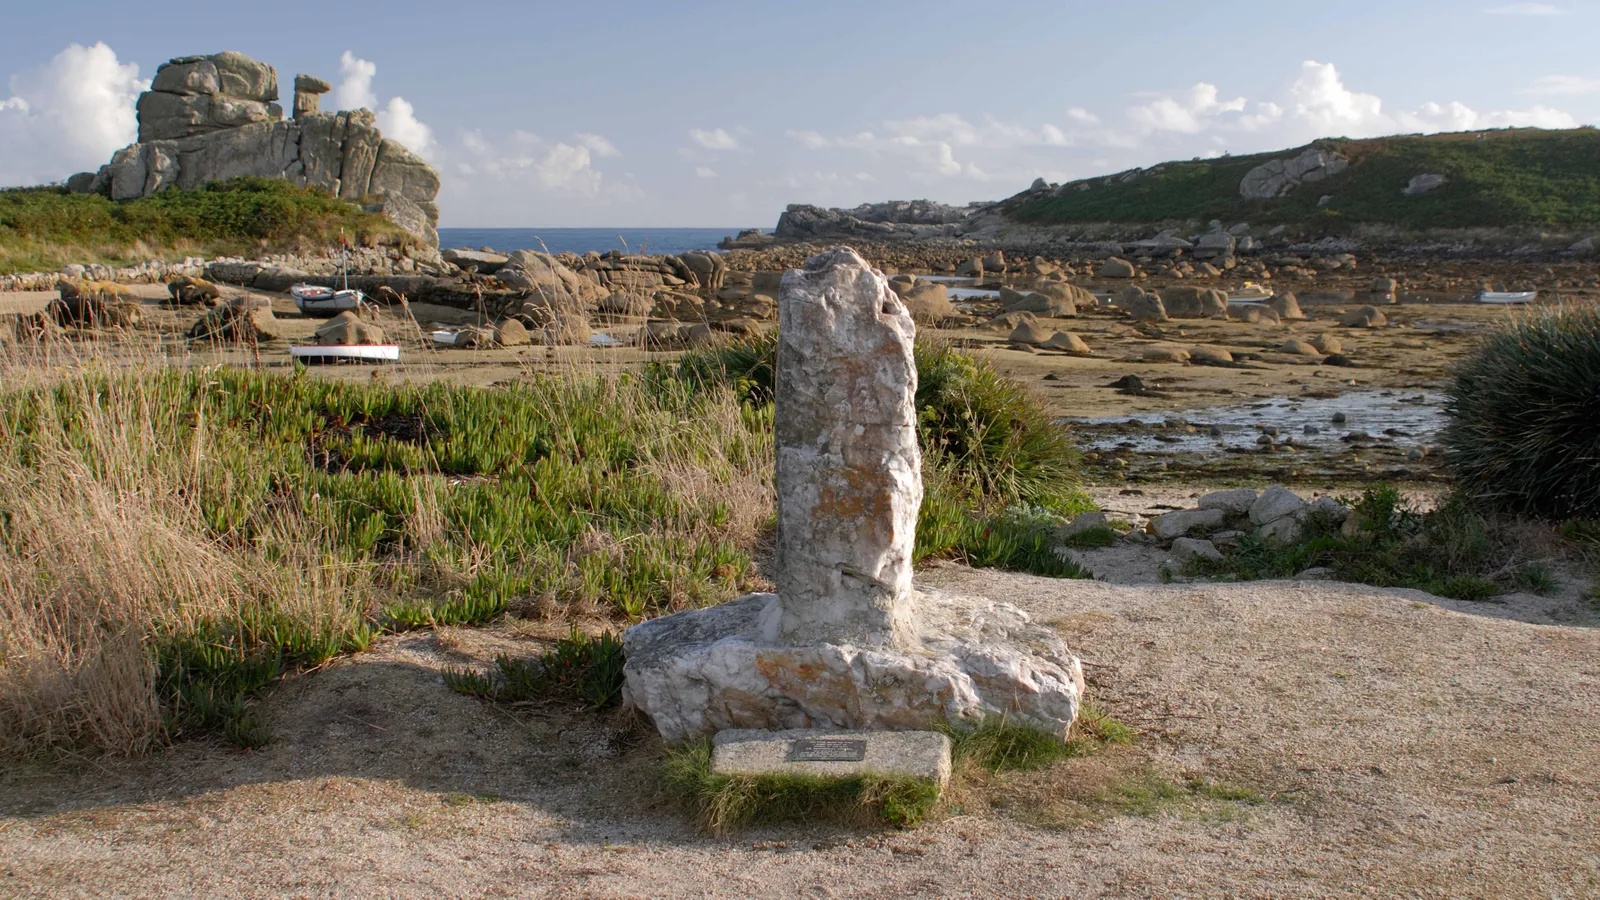 A stone memorial marks where Sir Cloudesley Shovell's body was washed up from the wreck of HMS Association